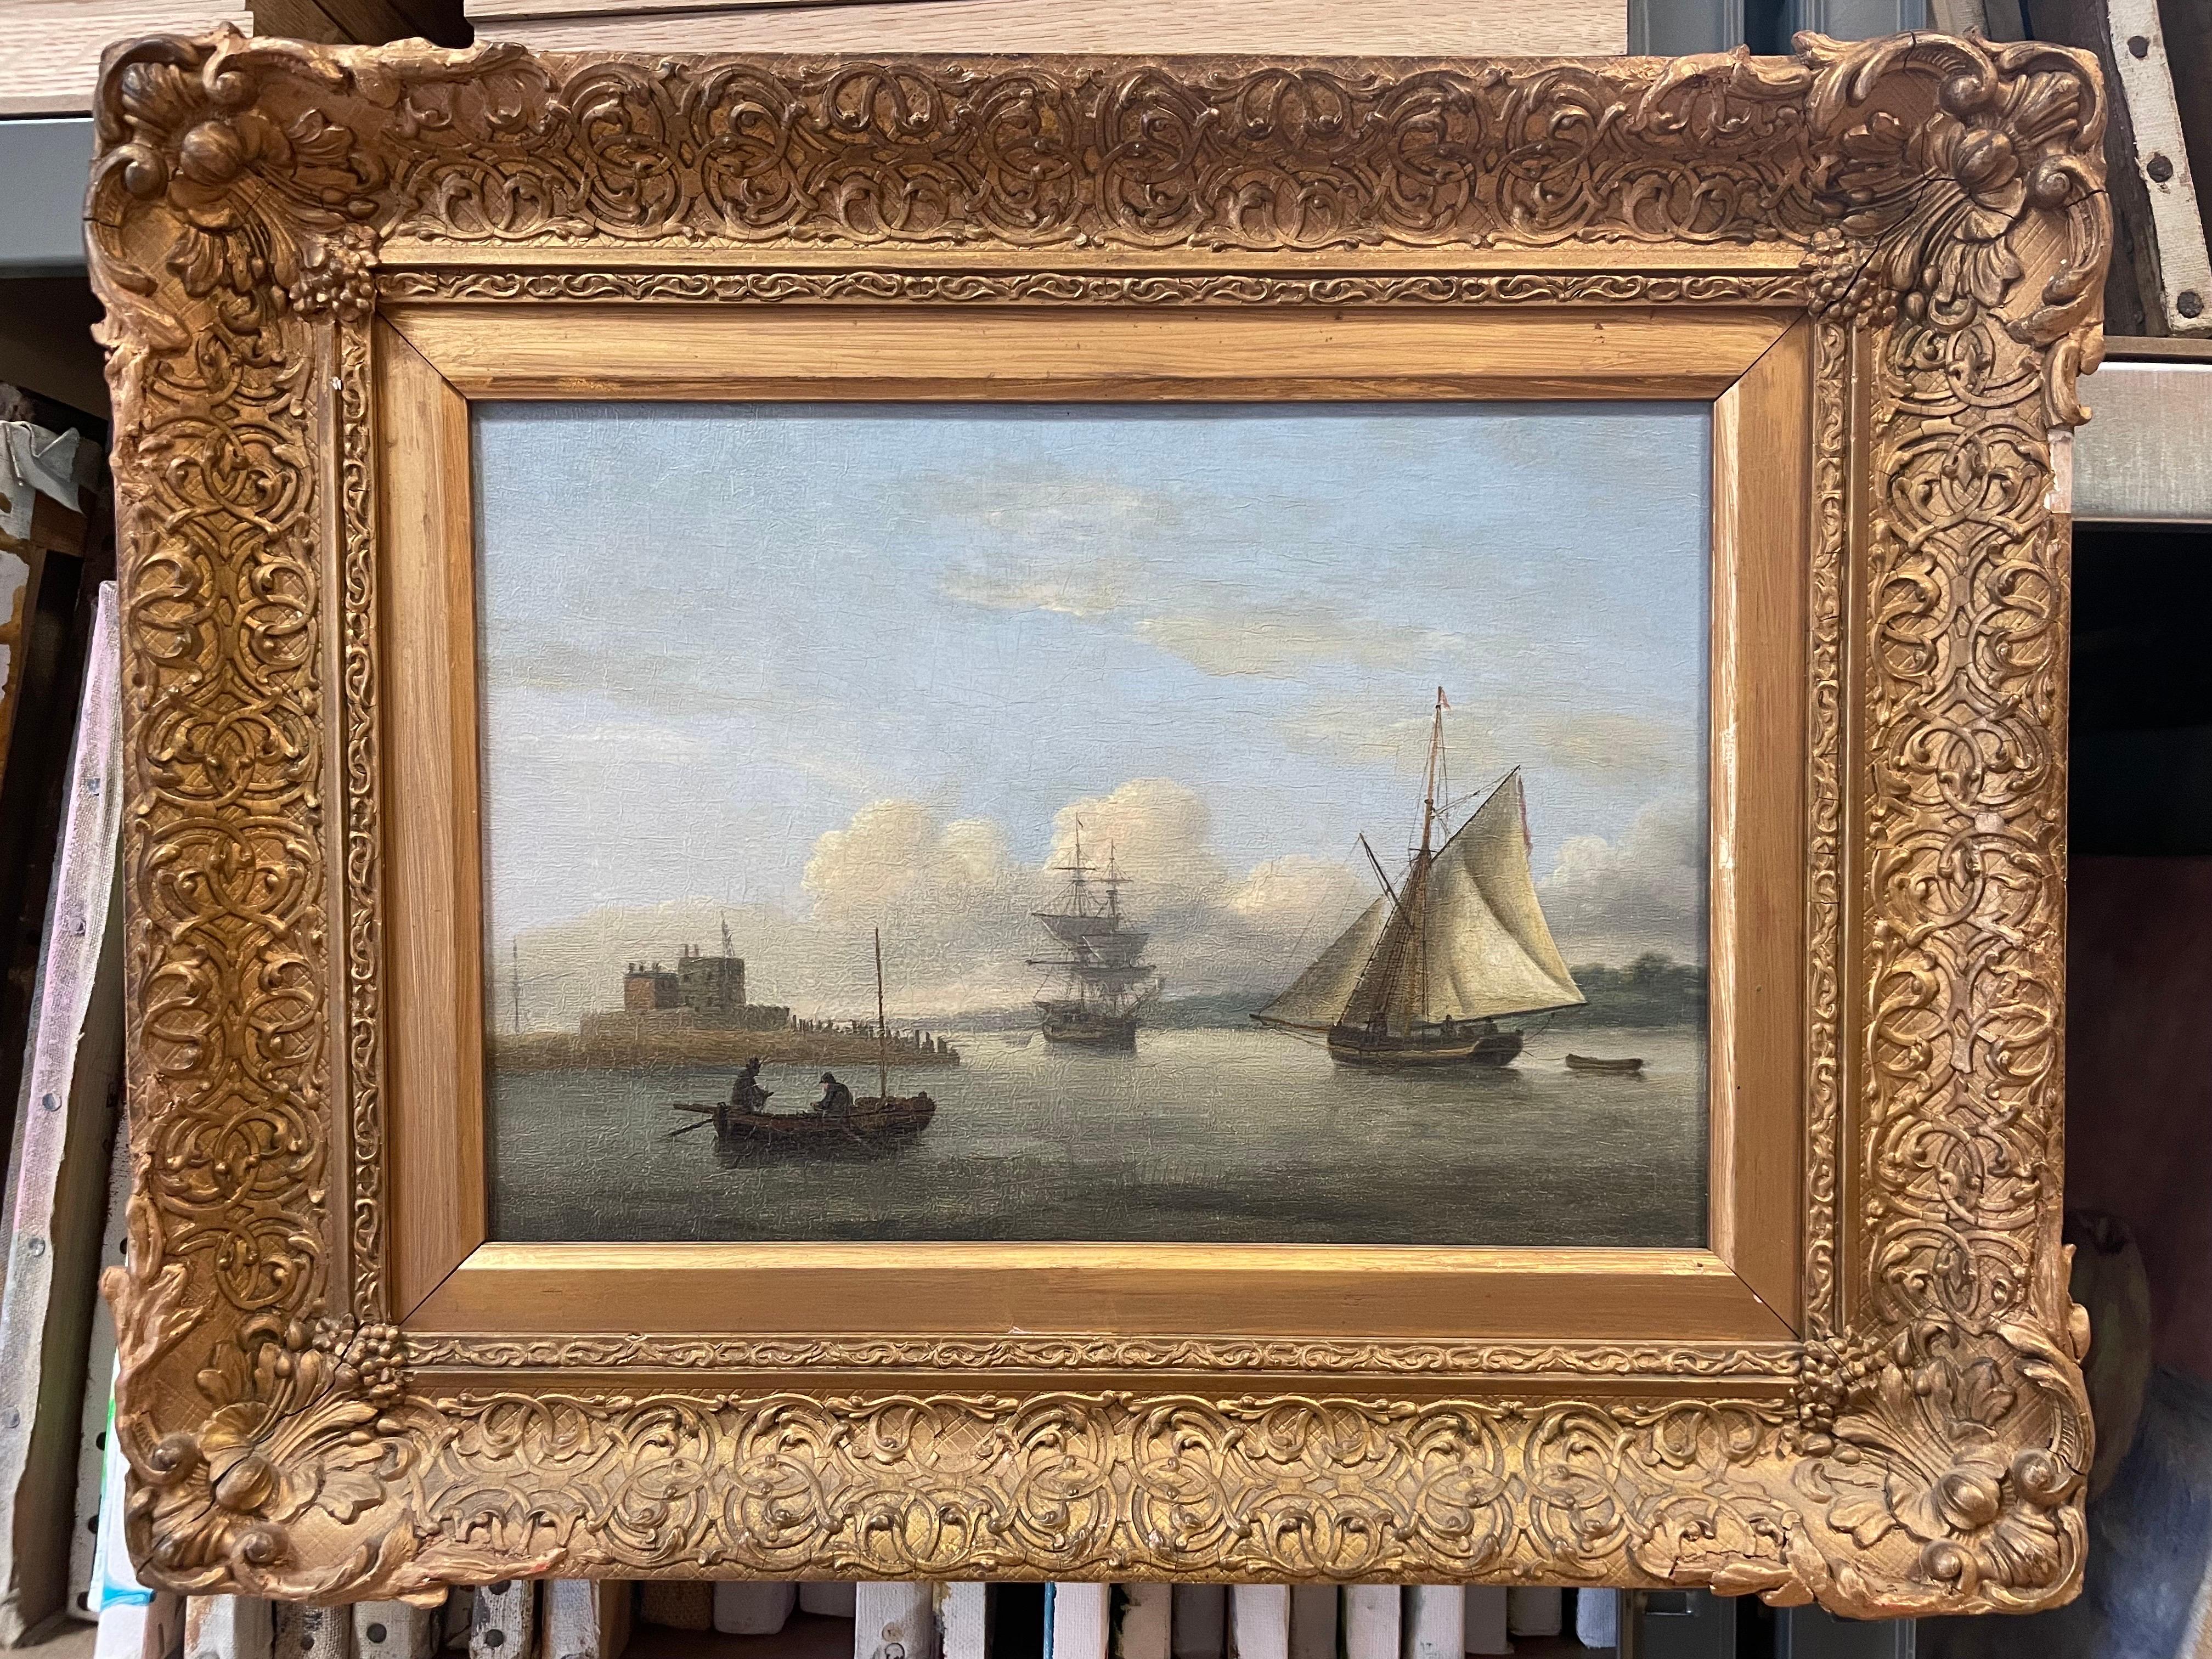 Artist: Dutch School, 18th century

Title: Shipping in a Calm Estuary, presented in ornate gilt antique frame

Medium: oil on wood panel, framed

Framed: 15.5 x 19.5 inches
Size: 11 x 15.5 inches

Provenance: from a private UK collection

Condition: